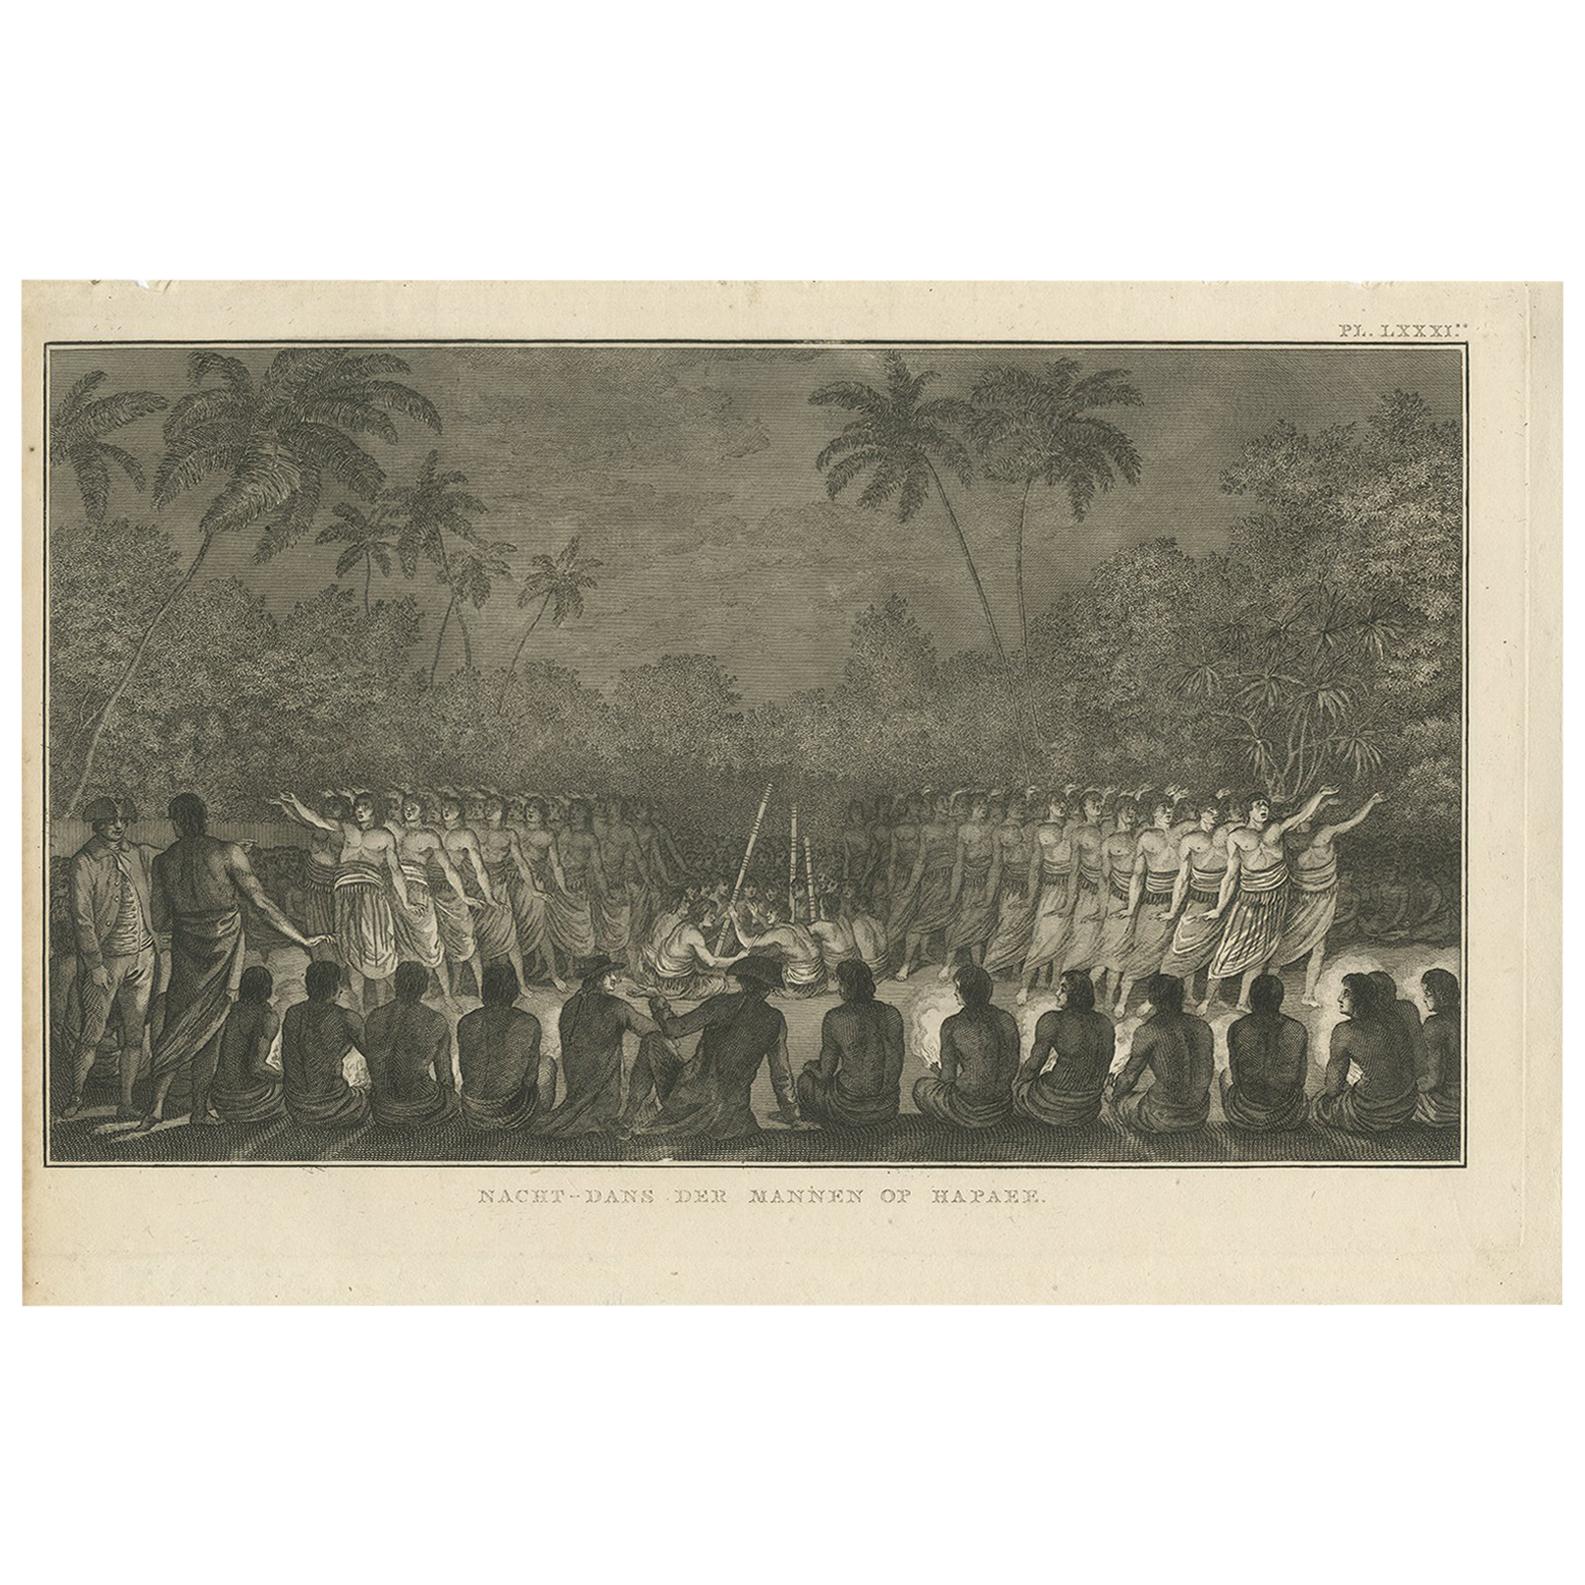 Antique Print of a Night Dance by Men from Hapaee by Cook, 1803